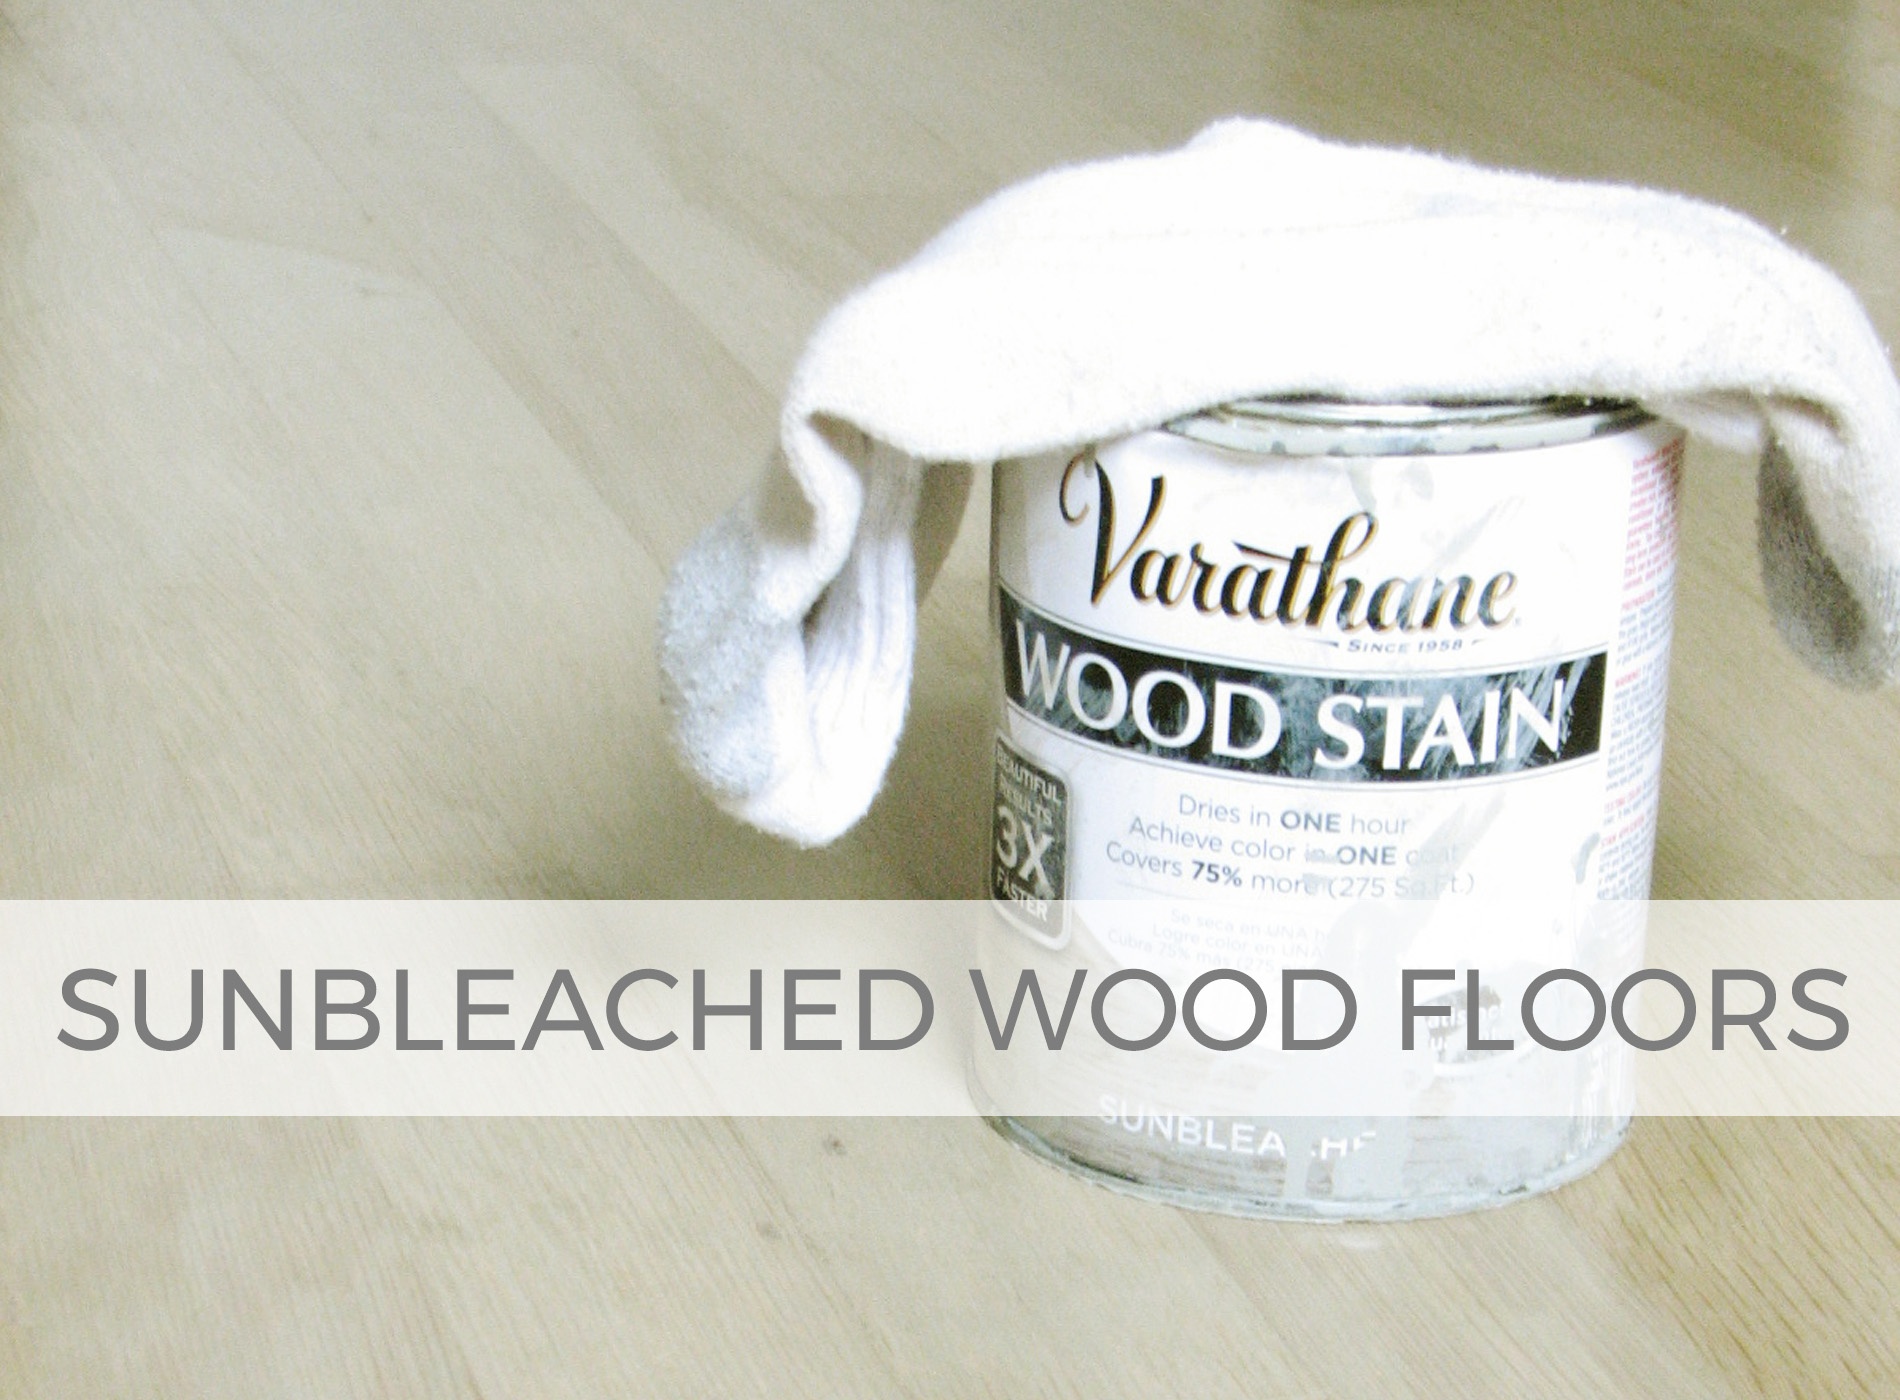 Refresh your hardwood floors with a soothing sunbleached stain | prodigalpieces.com #prodigalpieces